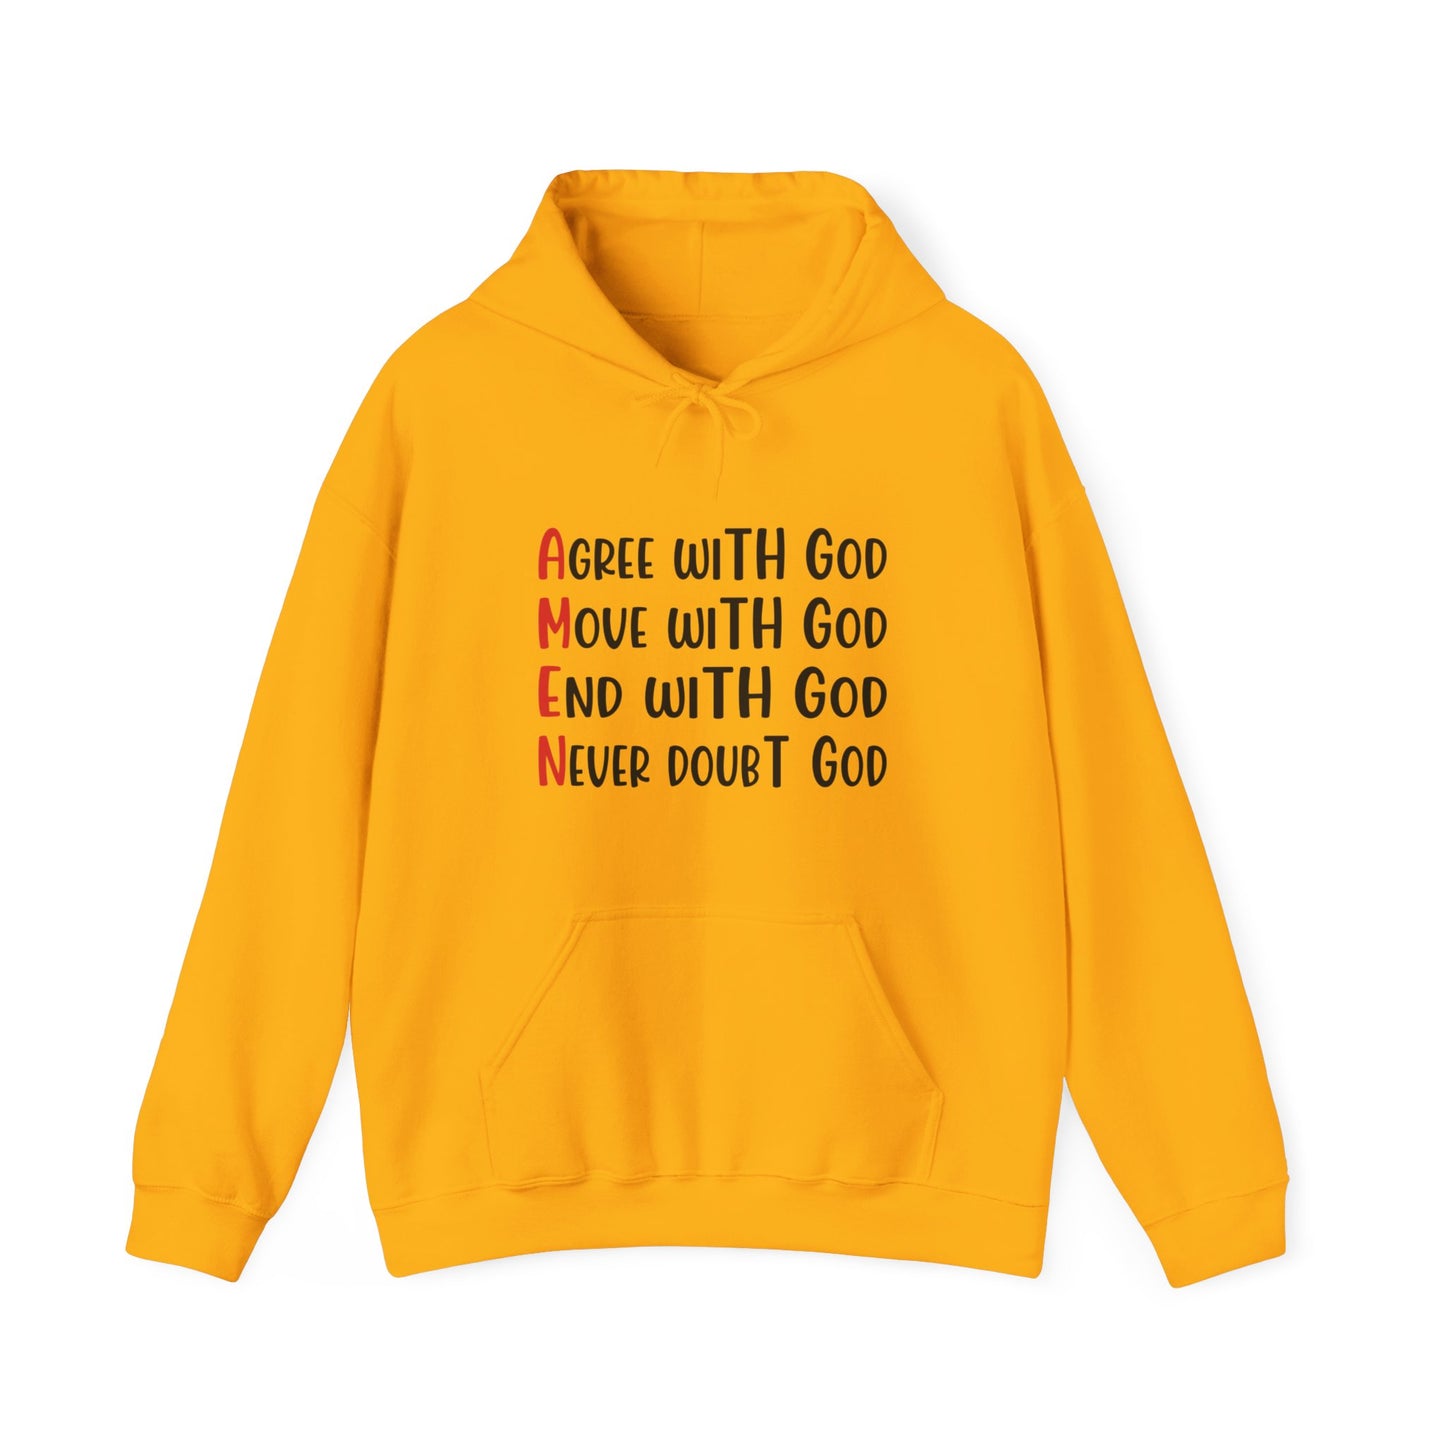 AMEN Agree, Move, End With God Never Doubt God Unisex Christian Hooded Pullover Sweatshirt